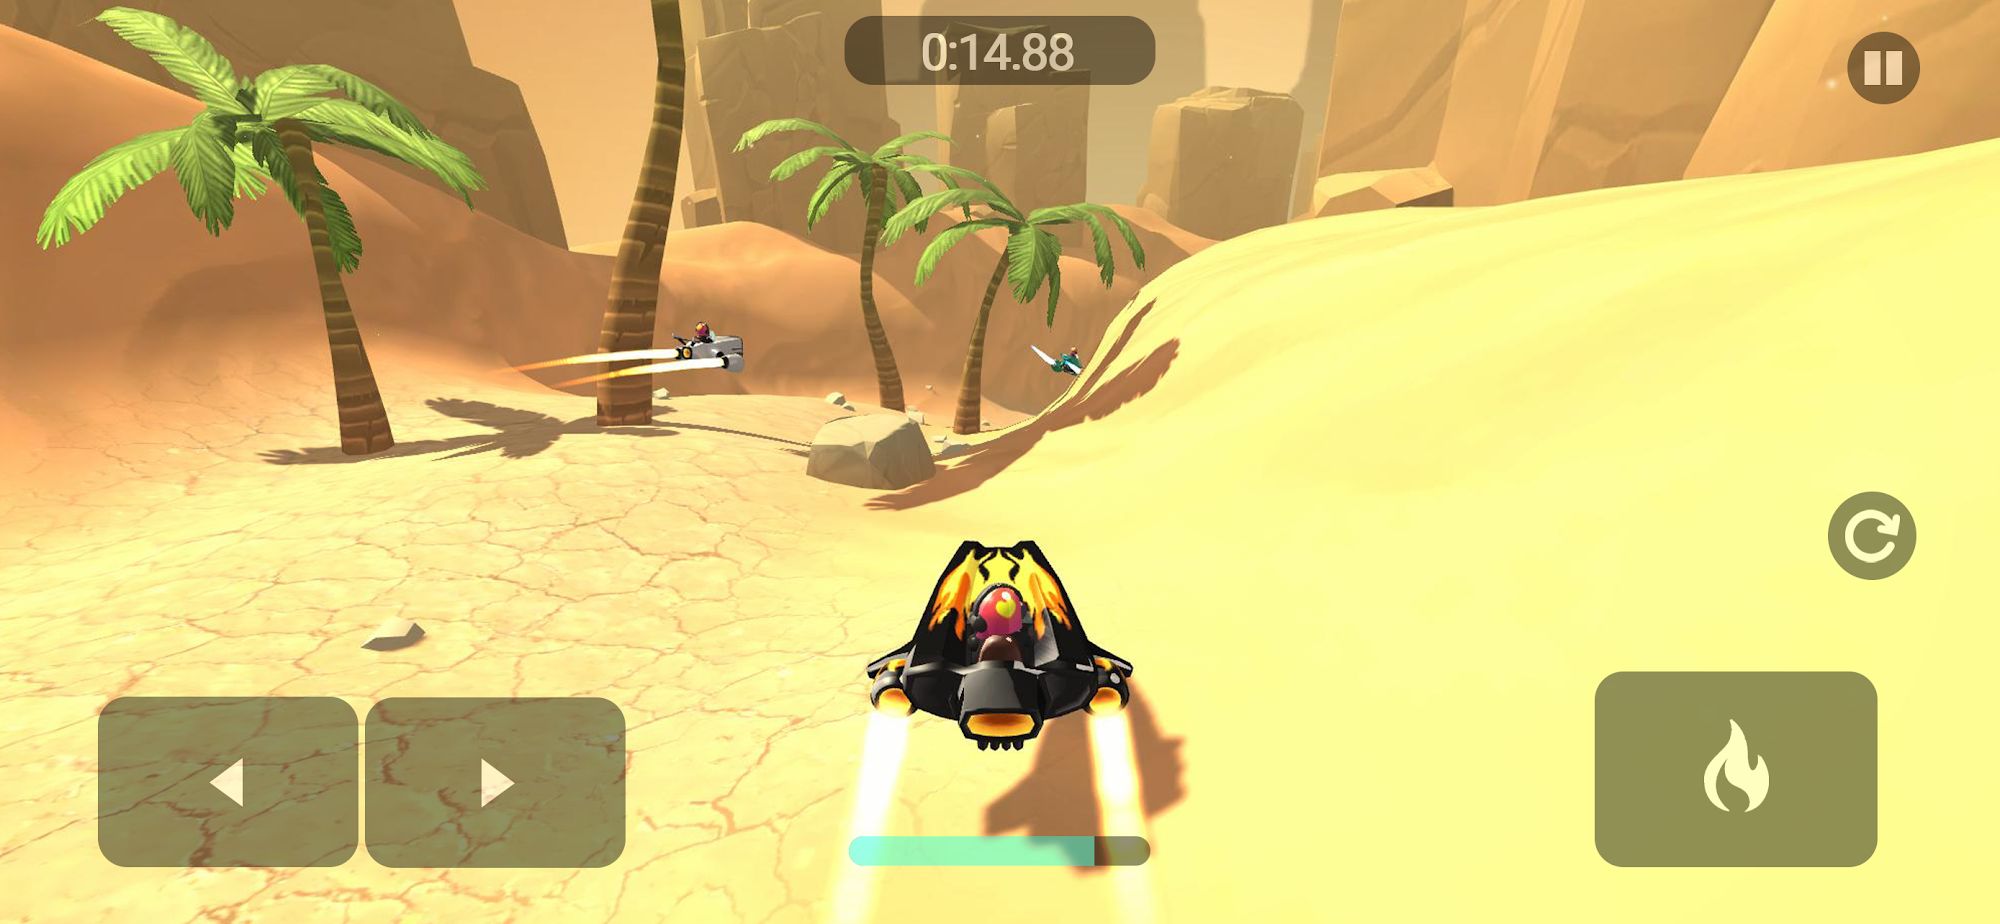 Download Hover League Android free game.